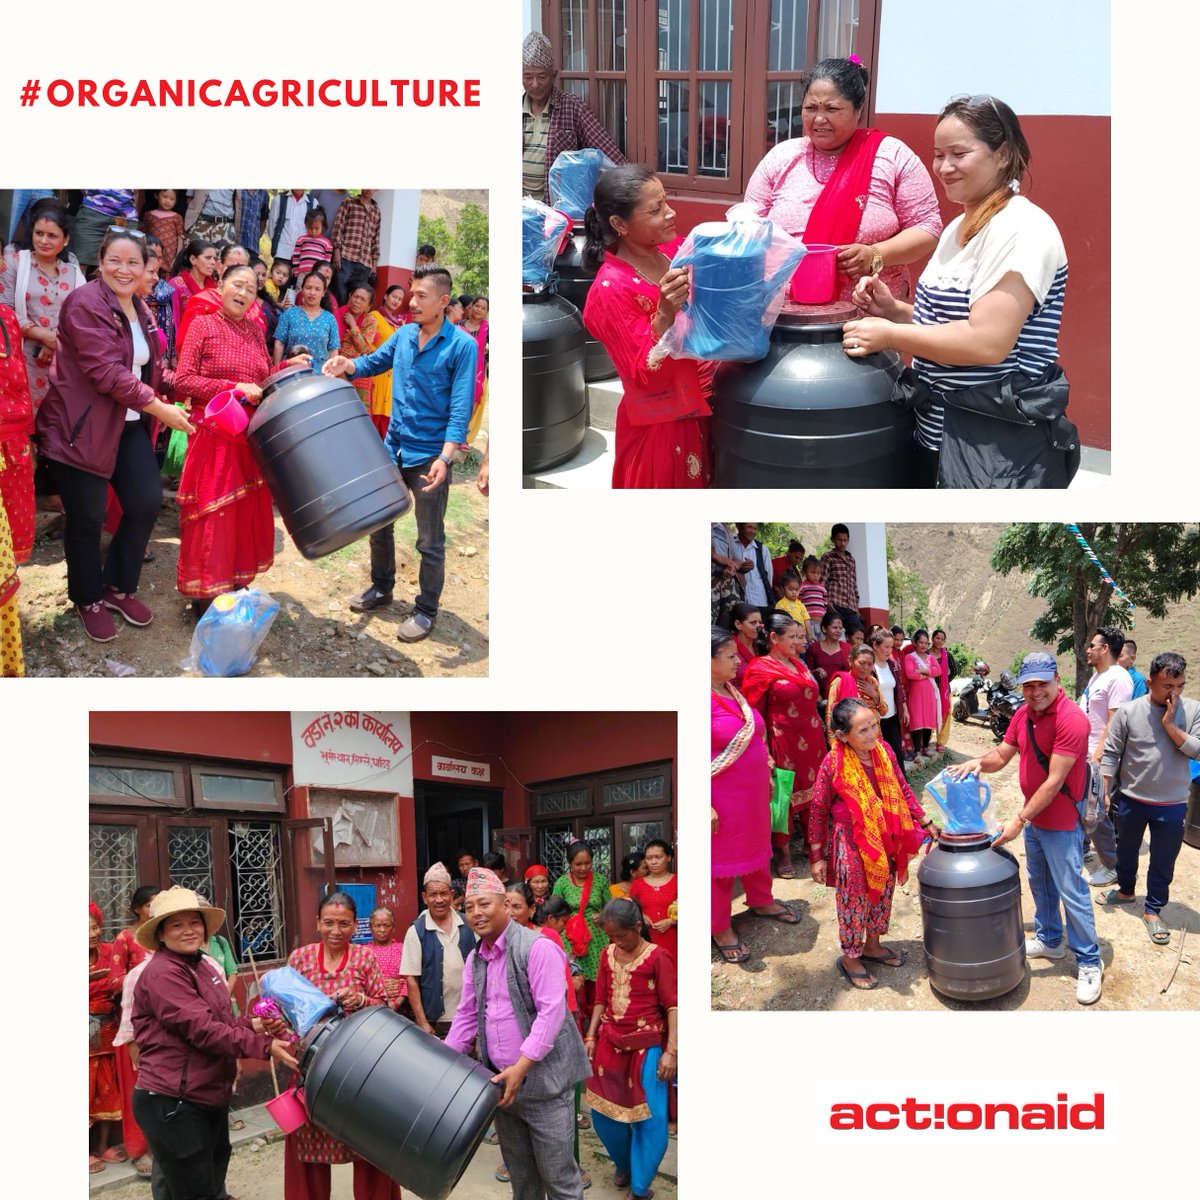 🌱 Exciting news! ICDC Dhading & ActionAid Nepal distributed biofertilizers to 345 farmers in wards 1, 2, 3 & 7. Plus, 10 farmer groups got agroecology training. Let's grow sustainably! 🌾💚 #SustainableFarming #OrganicAgriculture #ActionAidNepal